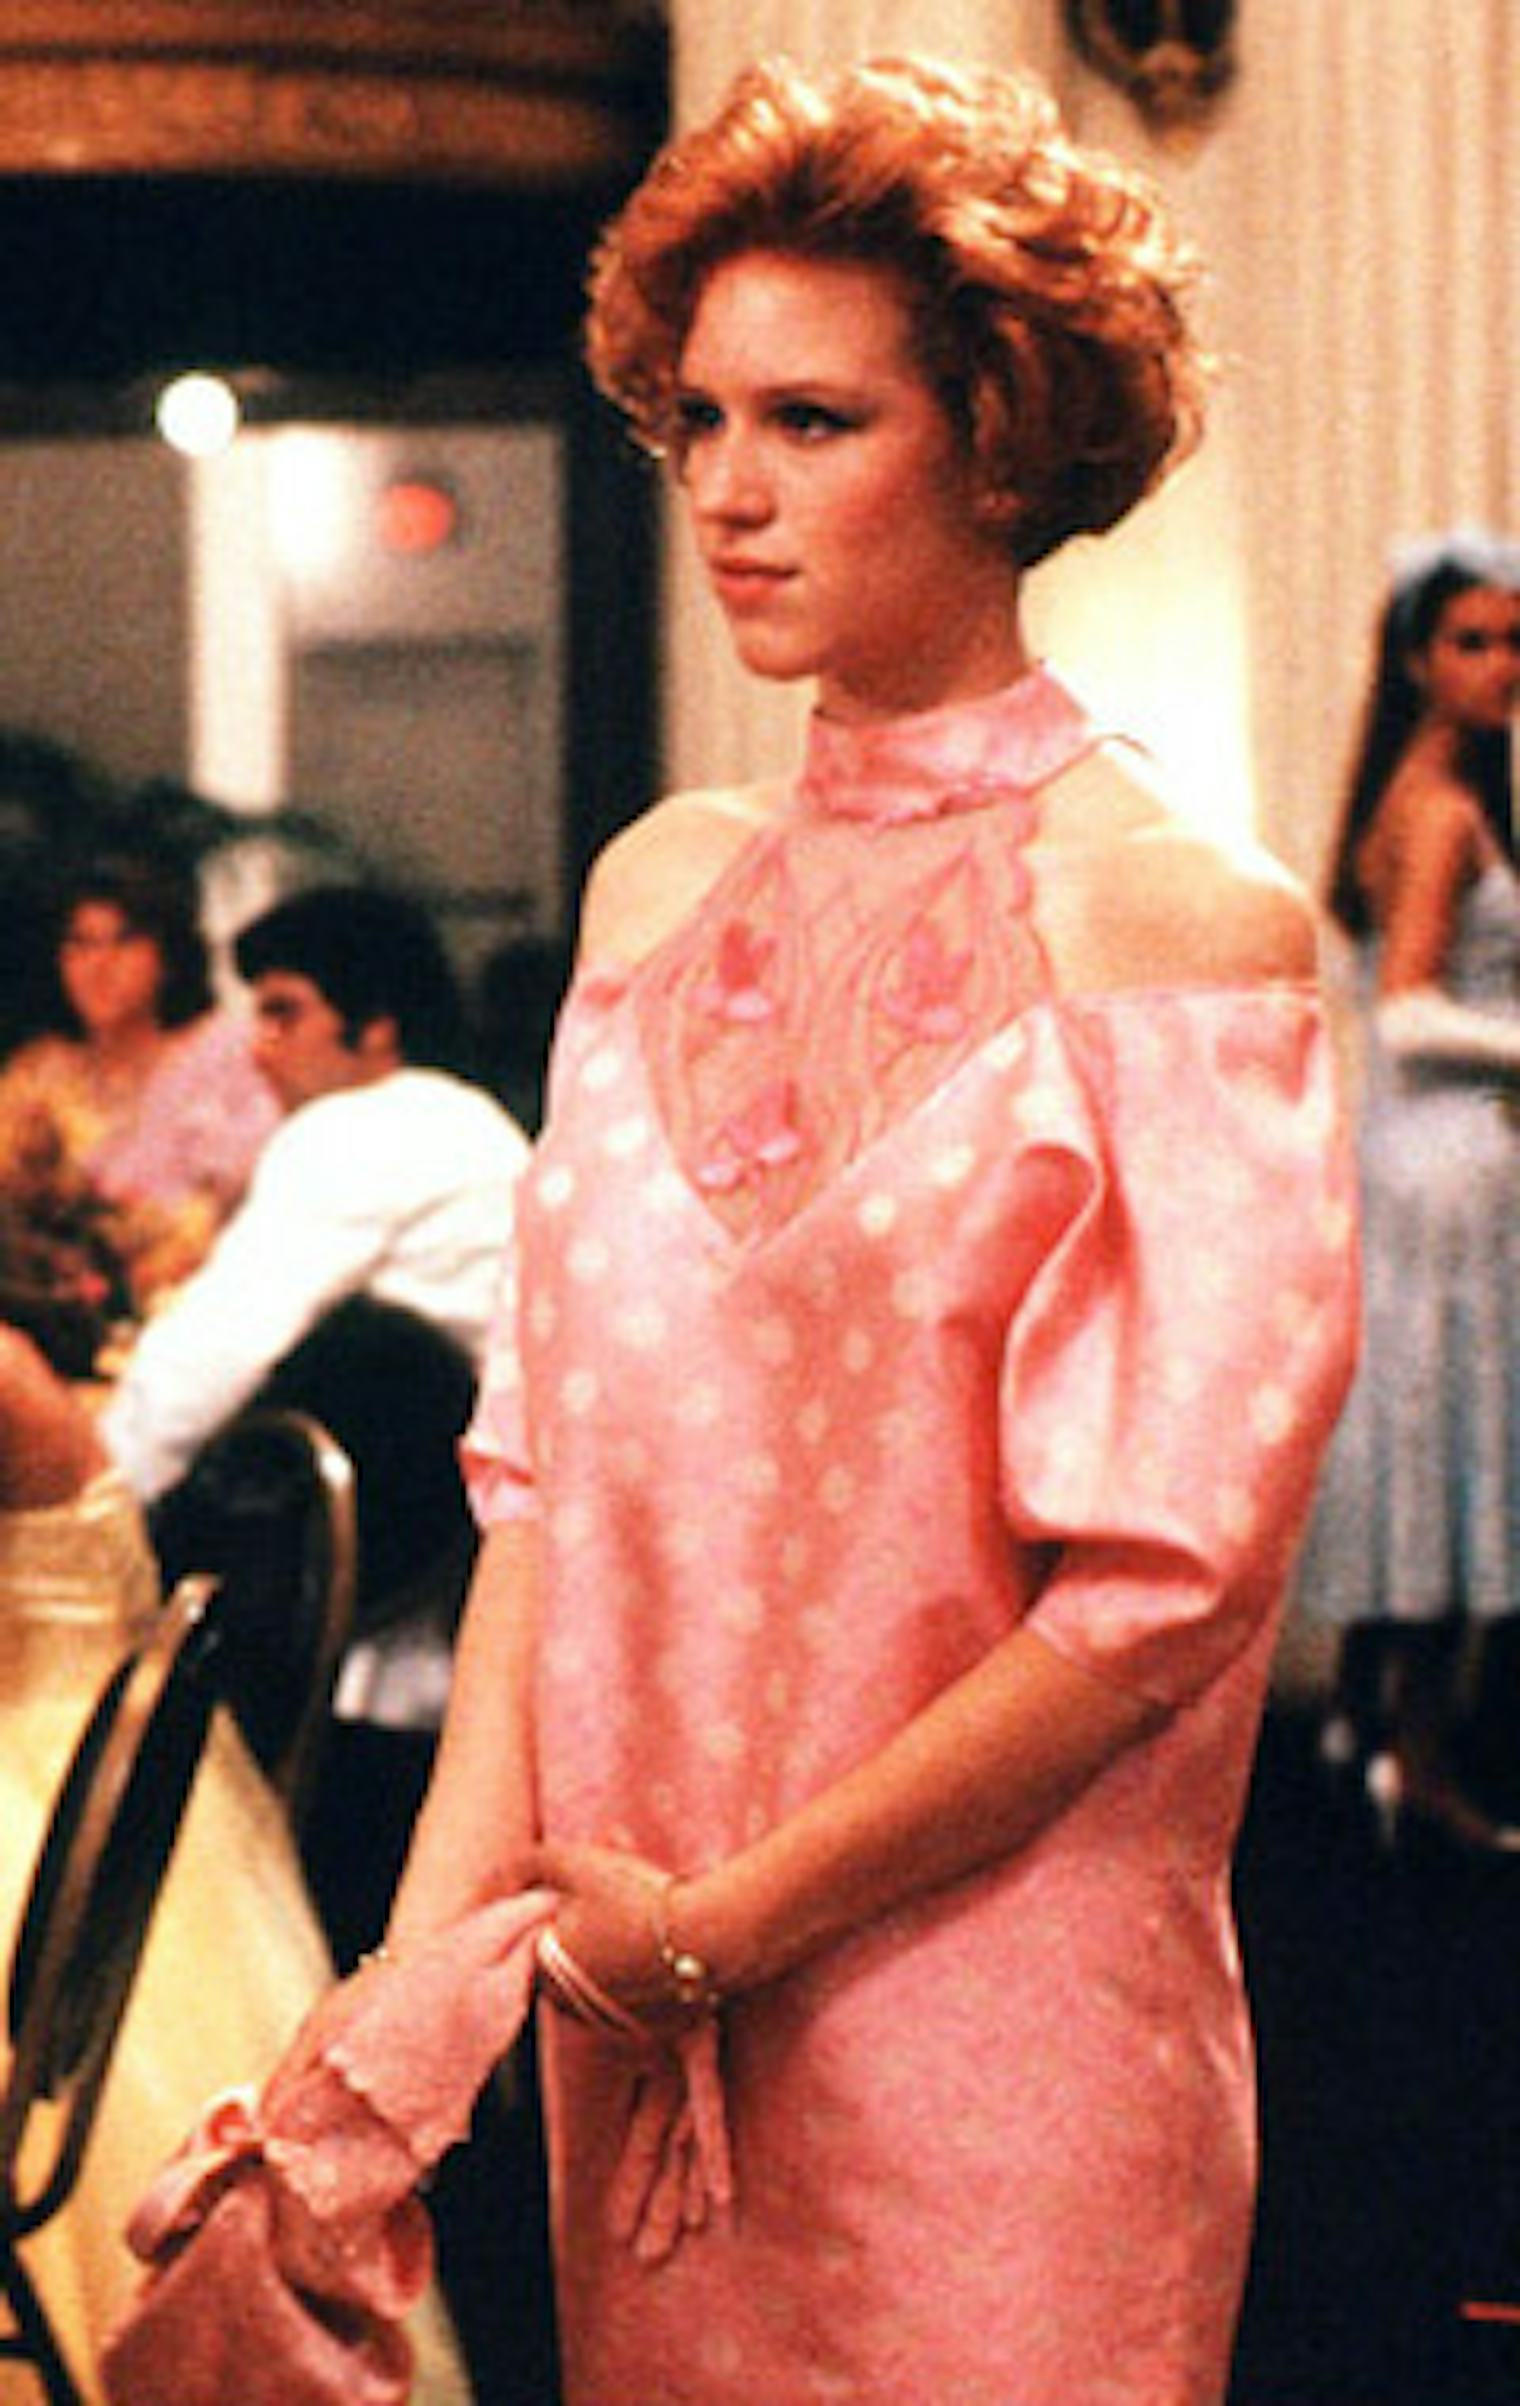 12 '80s and '90s Prom Dresses From TV And Movies That I Never Want To